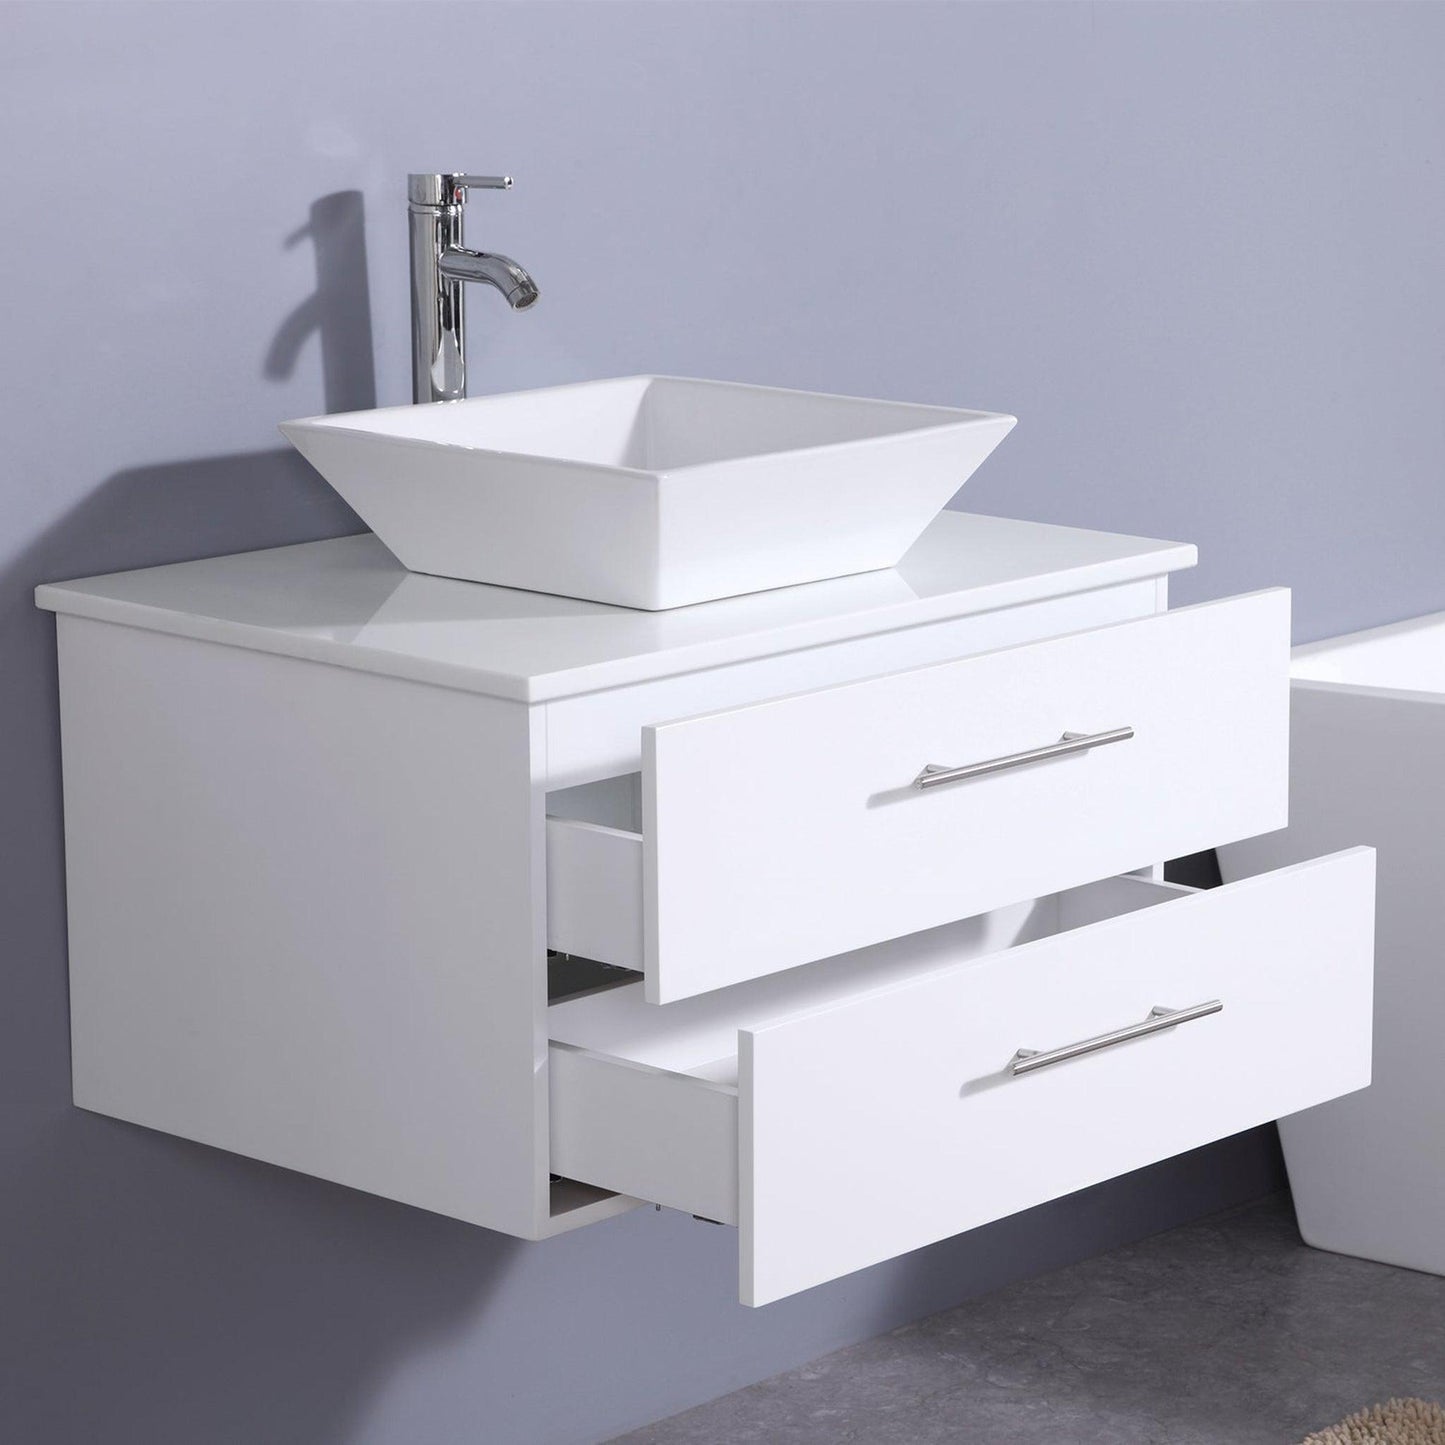 Eviva Totti Wave 24" x 16" White Wall-Mounted Bathroom Vanity With White Man-Made Stone Countertop and Single Porcelain Sink